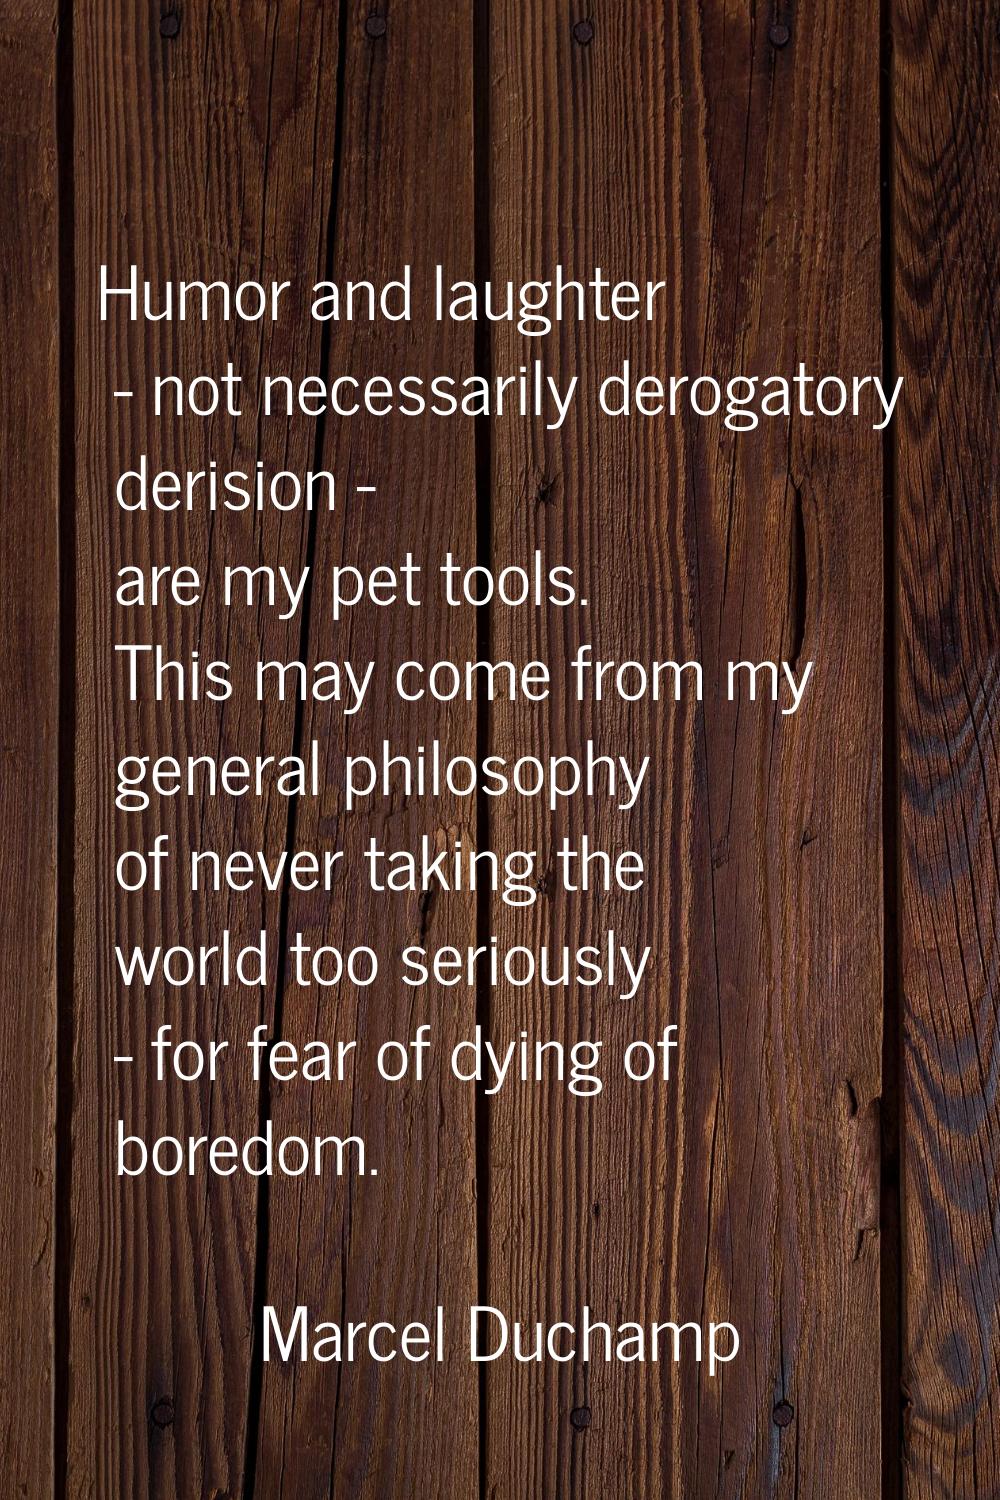 Humor and laughter - not necessarily derogatory derision - are my pet tools. This may come from my 